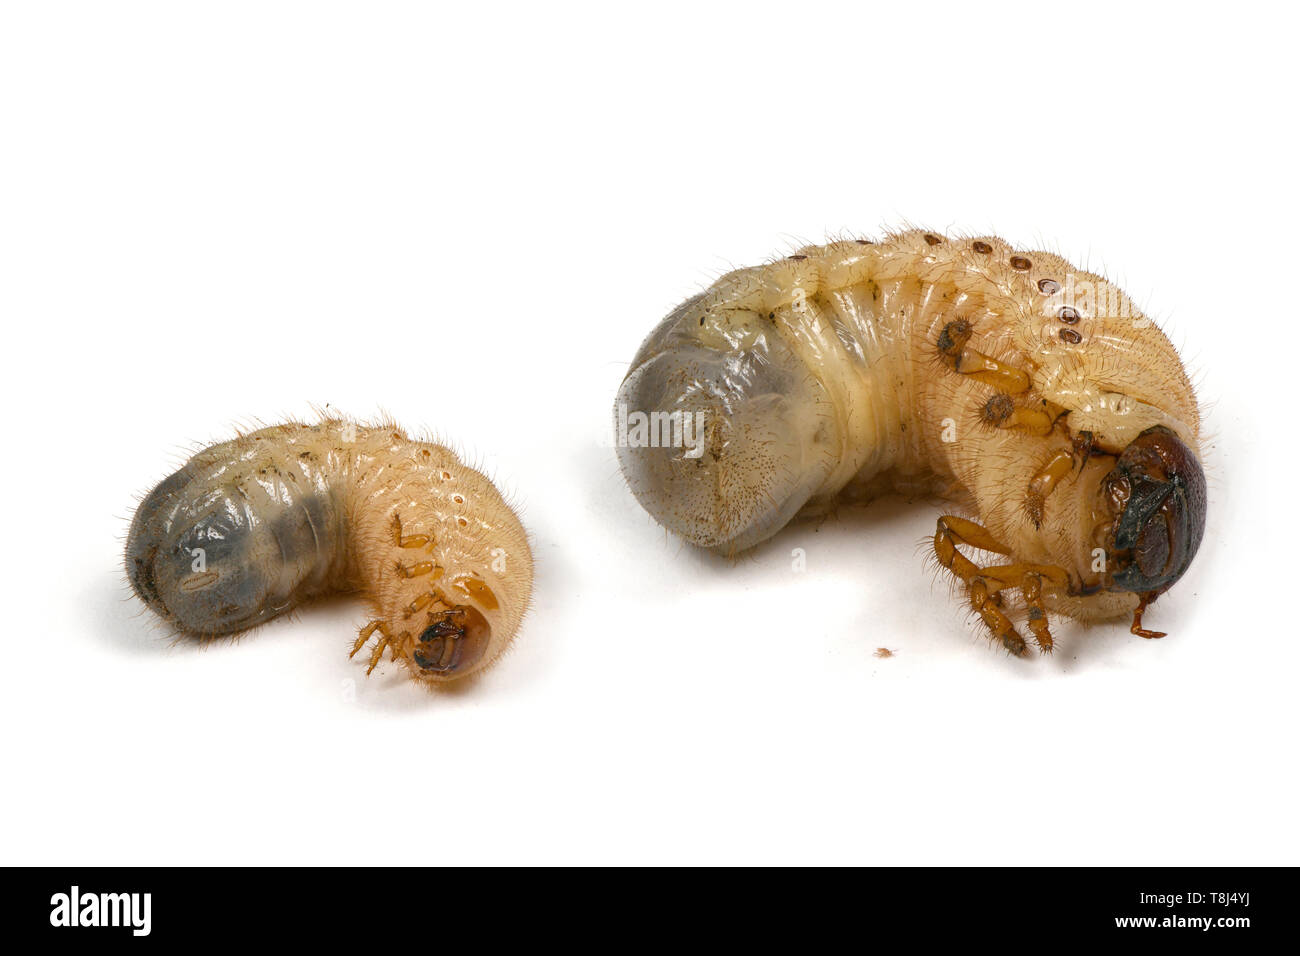 Concept photo larva of two beetles, rhinoceros beetle (Oryctes nasicornis) and may-bug (Melolontha)  and their acarus, parasite of their species, isol Stock Photo